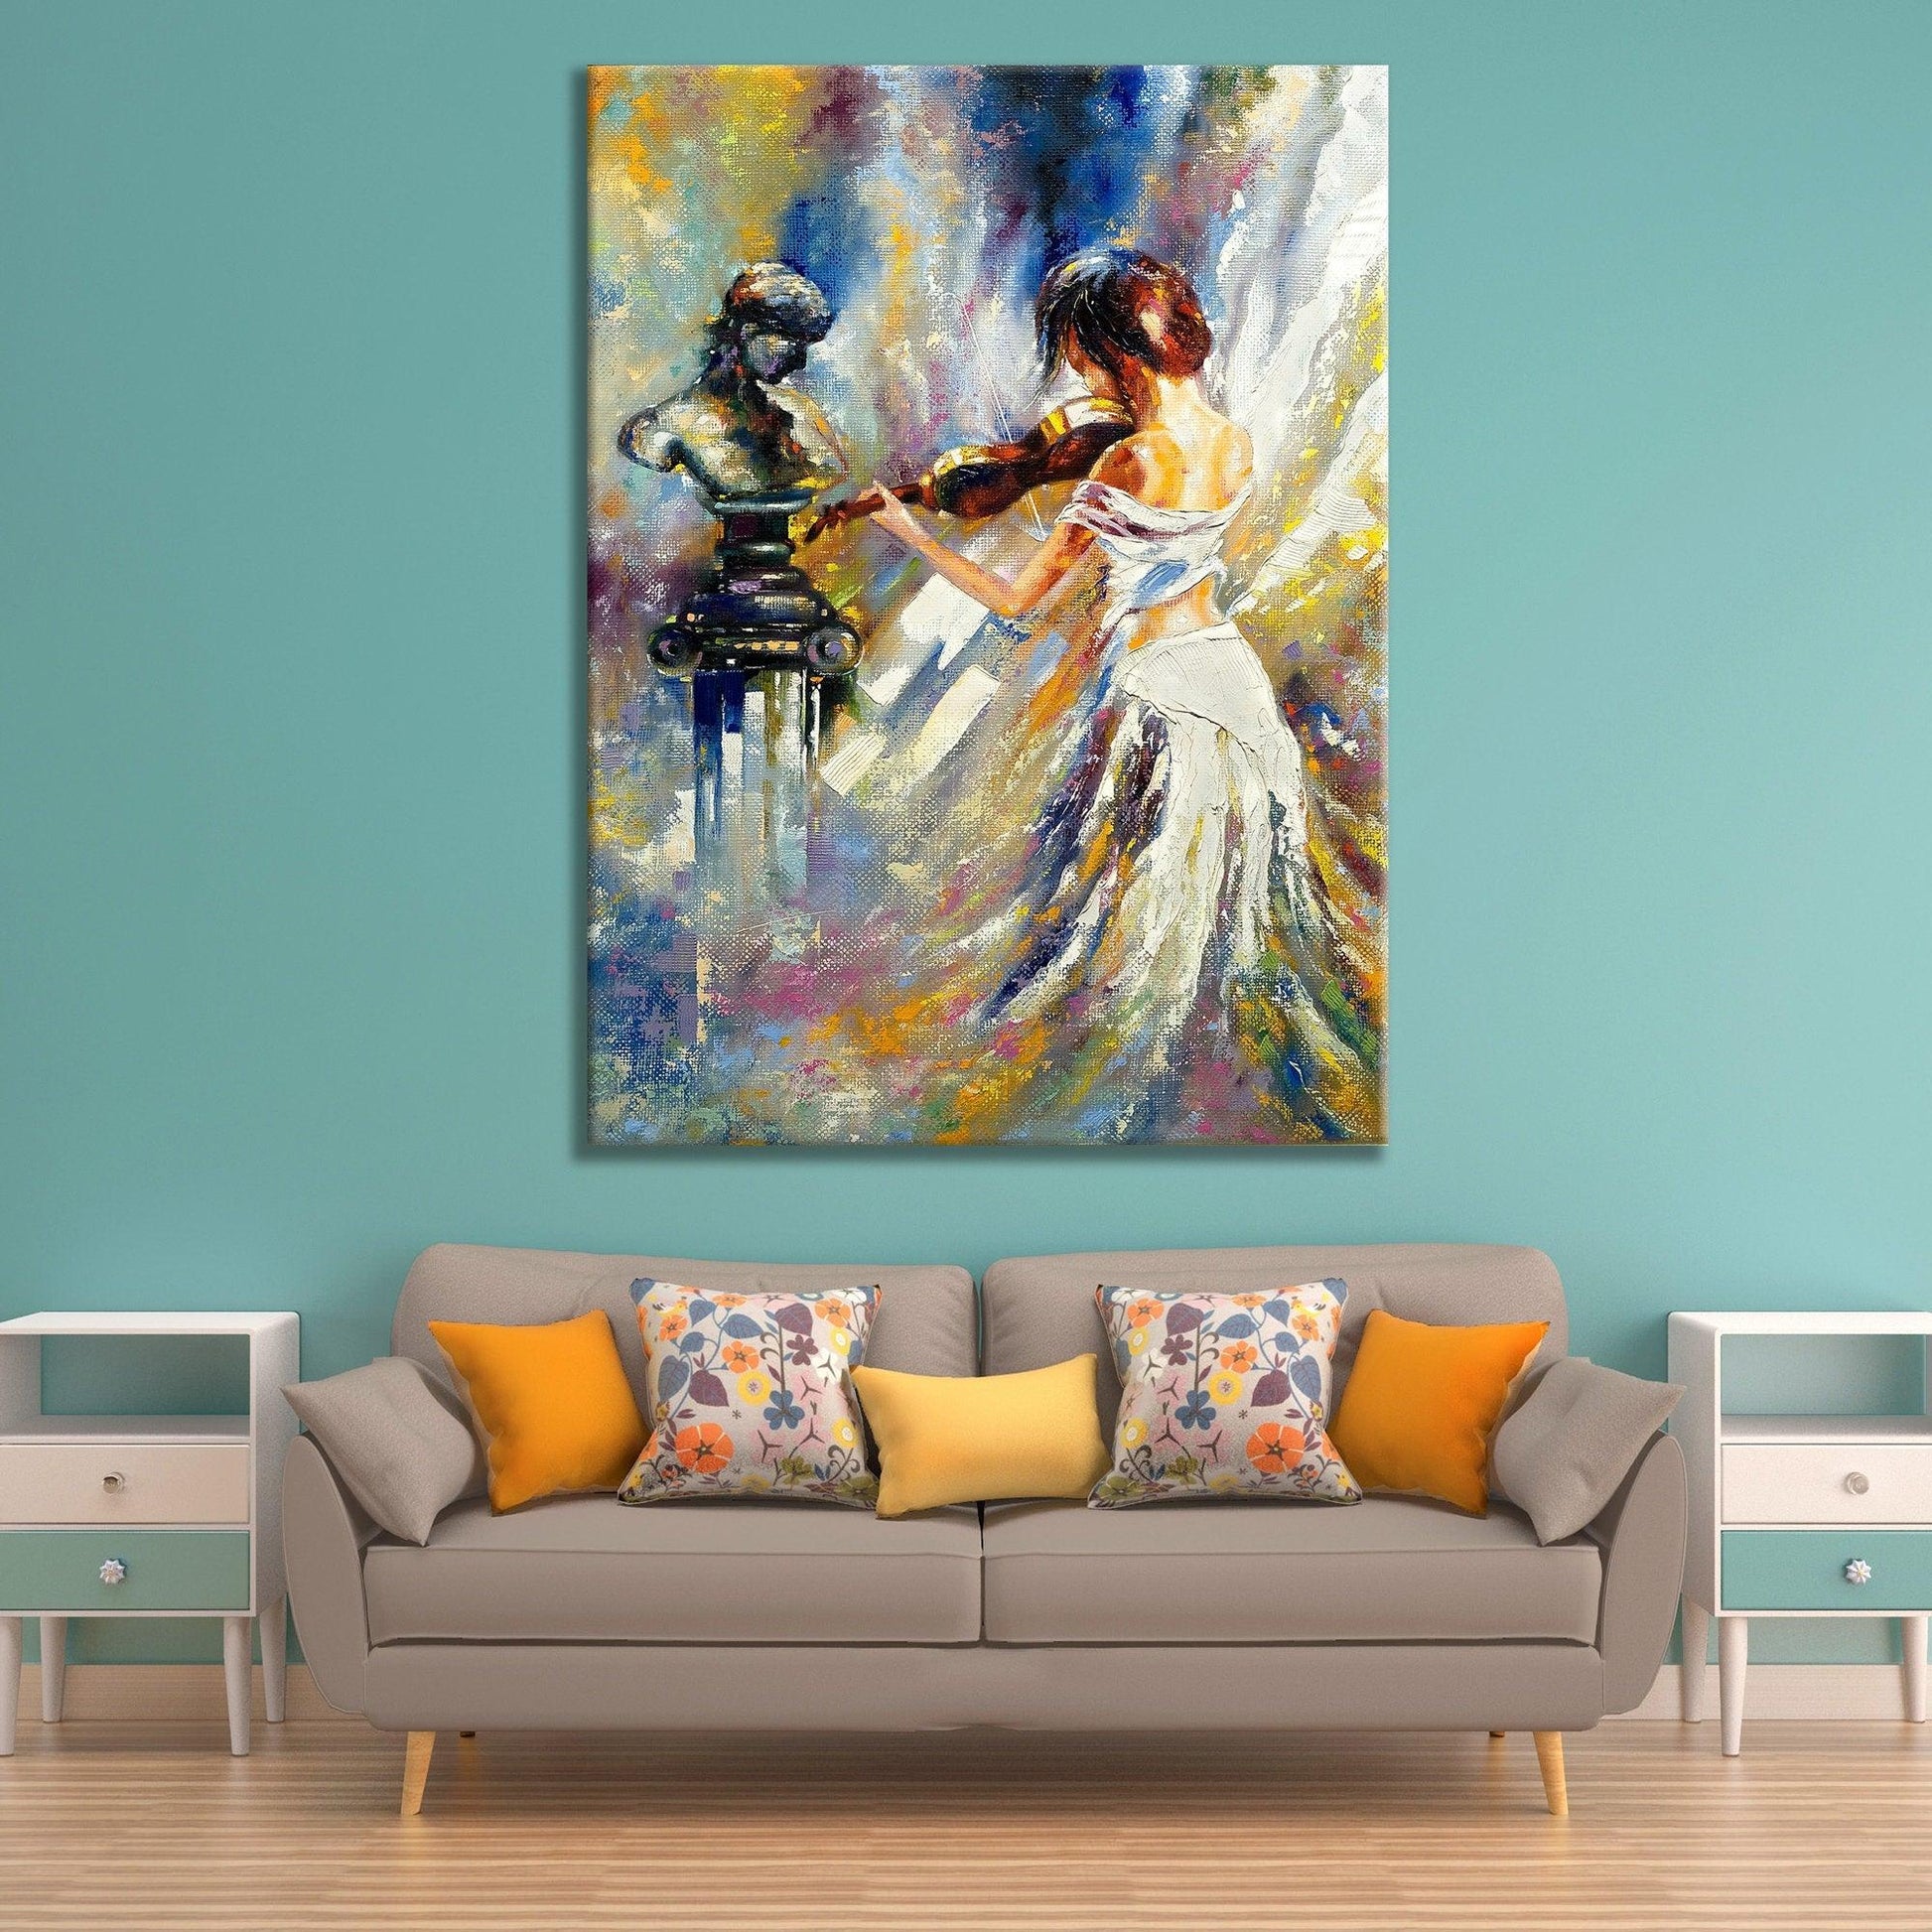 woman playing guitar canvas painting , abstract human portrait, musical instrument home decor , guitar drawing canvas print, music wall art - TrendiArt